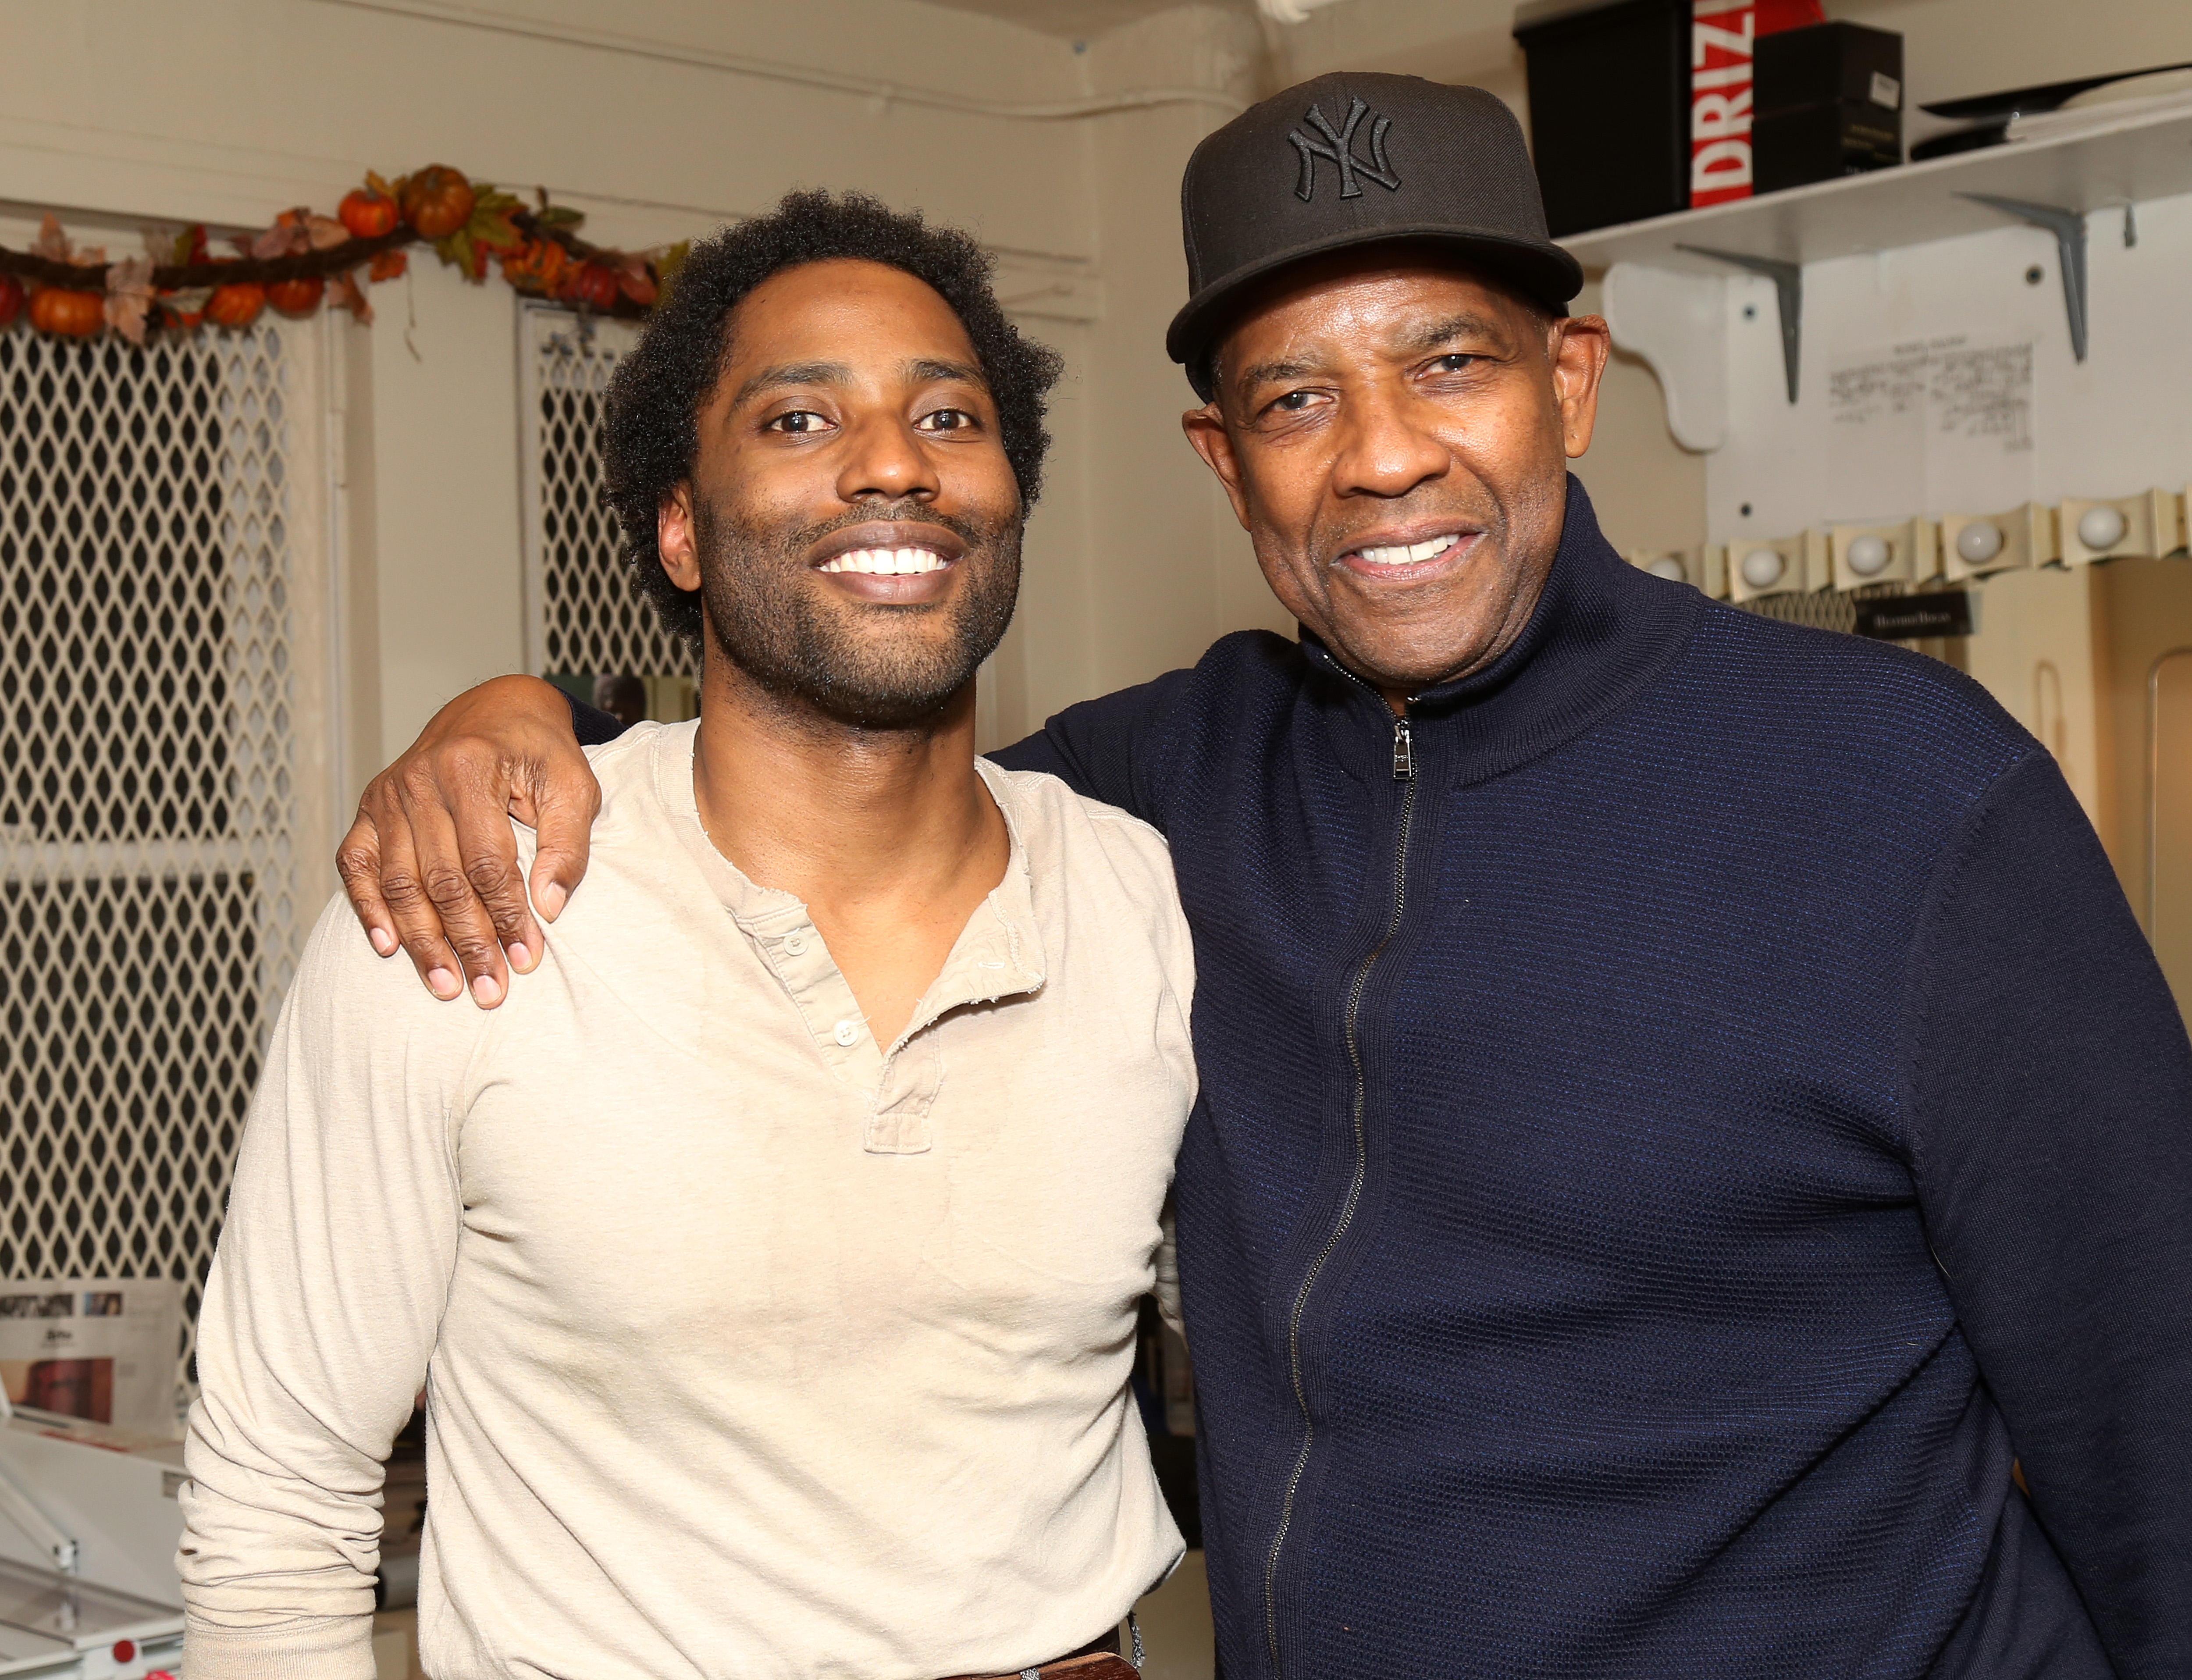 John David Washington and father Denzel Washington pose backstage at the play "The Piano Lesson" on Broadway at The Barrymore Theater on November 18, 2022 in New York City. | Source: Getty Images